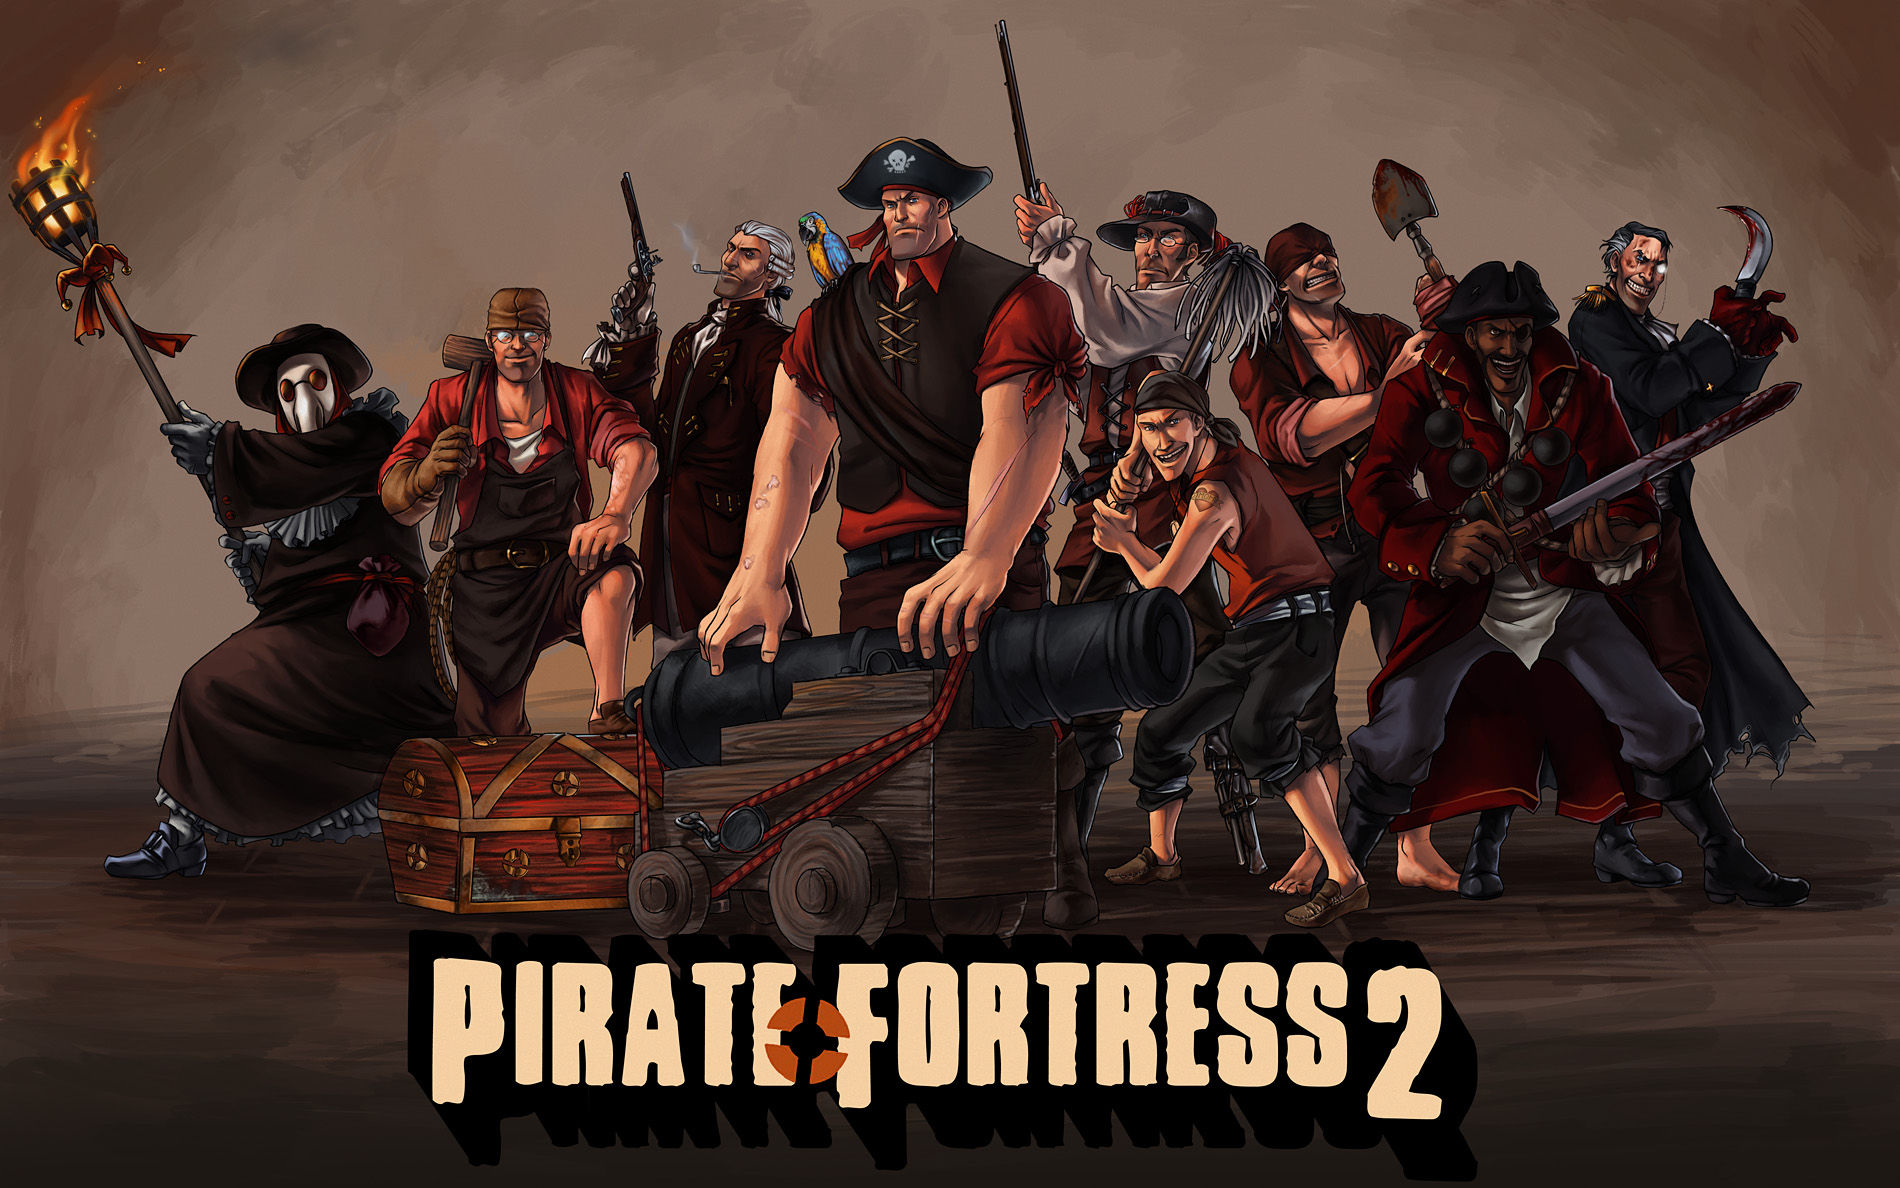 Pirate Fortress Team Fortress 2 Gabe Newell Portal - Team Fortress 2 Cover - HD Wallpaper 